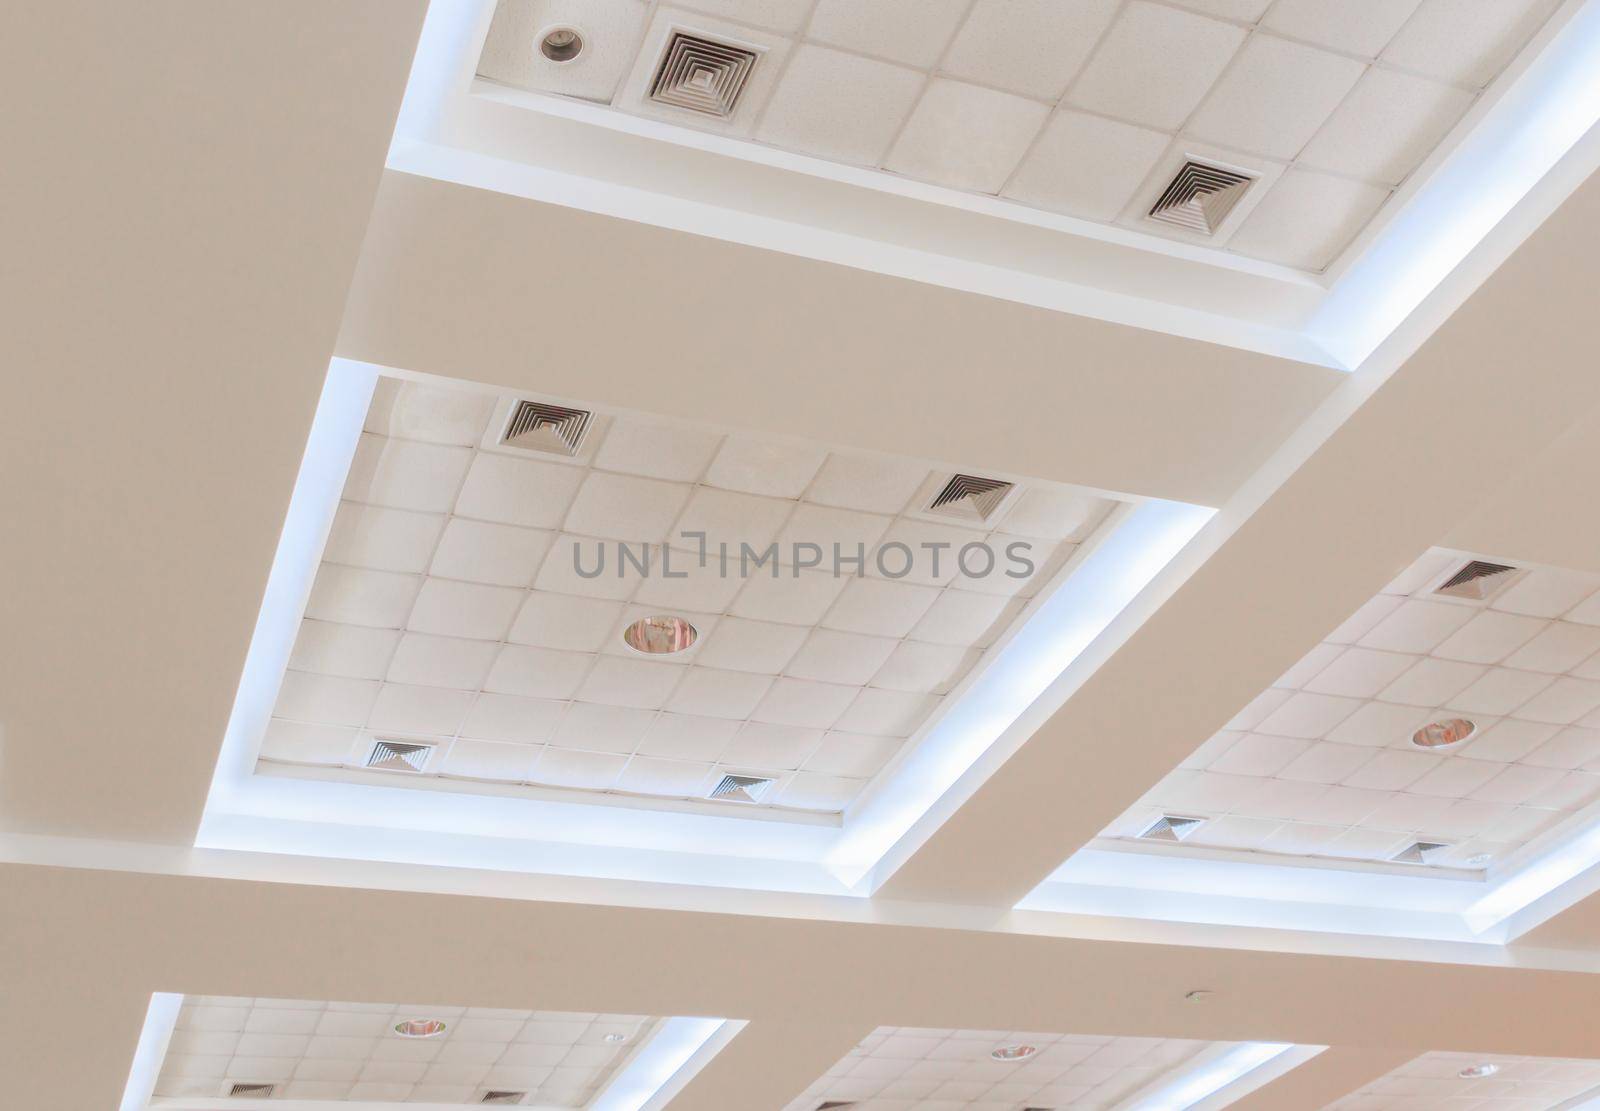 ceiling gypsum of business interior office building and light neon. style monochrome with copy space add text